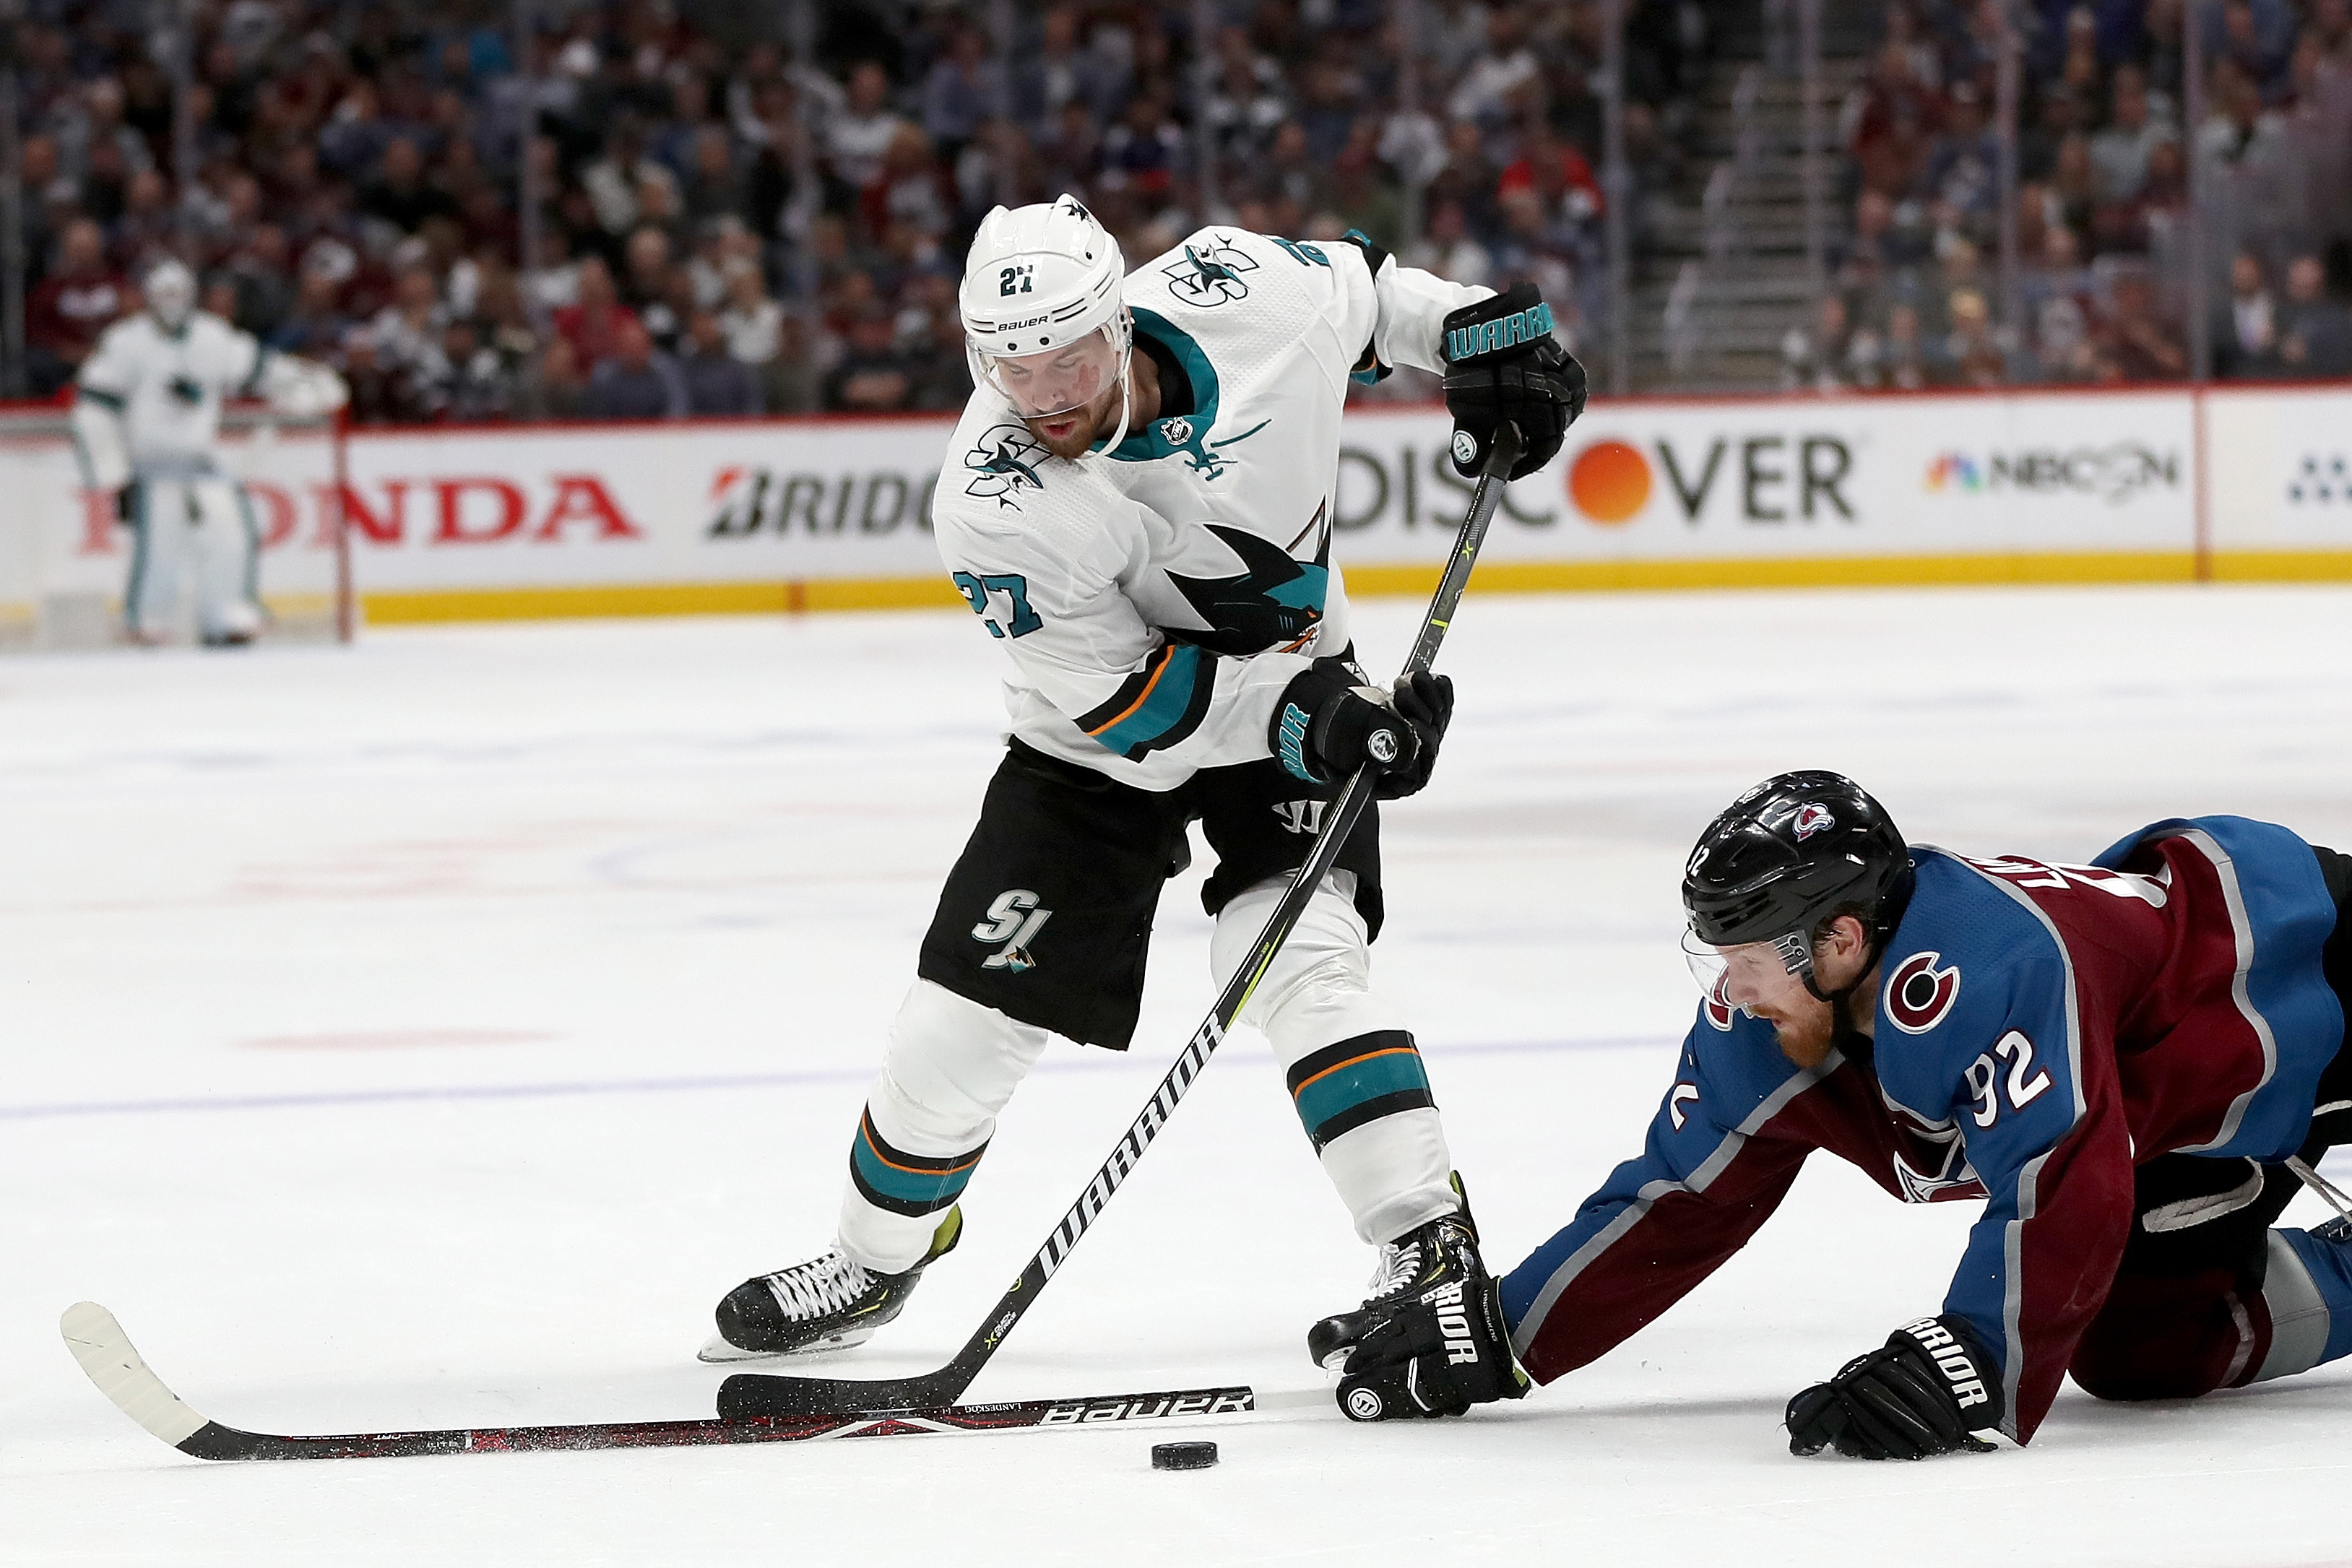 Joonas Donskoi of the San Jose Sharks attempts to get past Gabriel Landeskog of the Colorado Avalanche in the third period during Game 6 of the Western Conference Second Round during the 2019 NHL Stanley Cup Playoffs at the Pepsi Center on May 6, 2019 in 